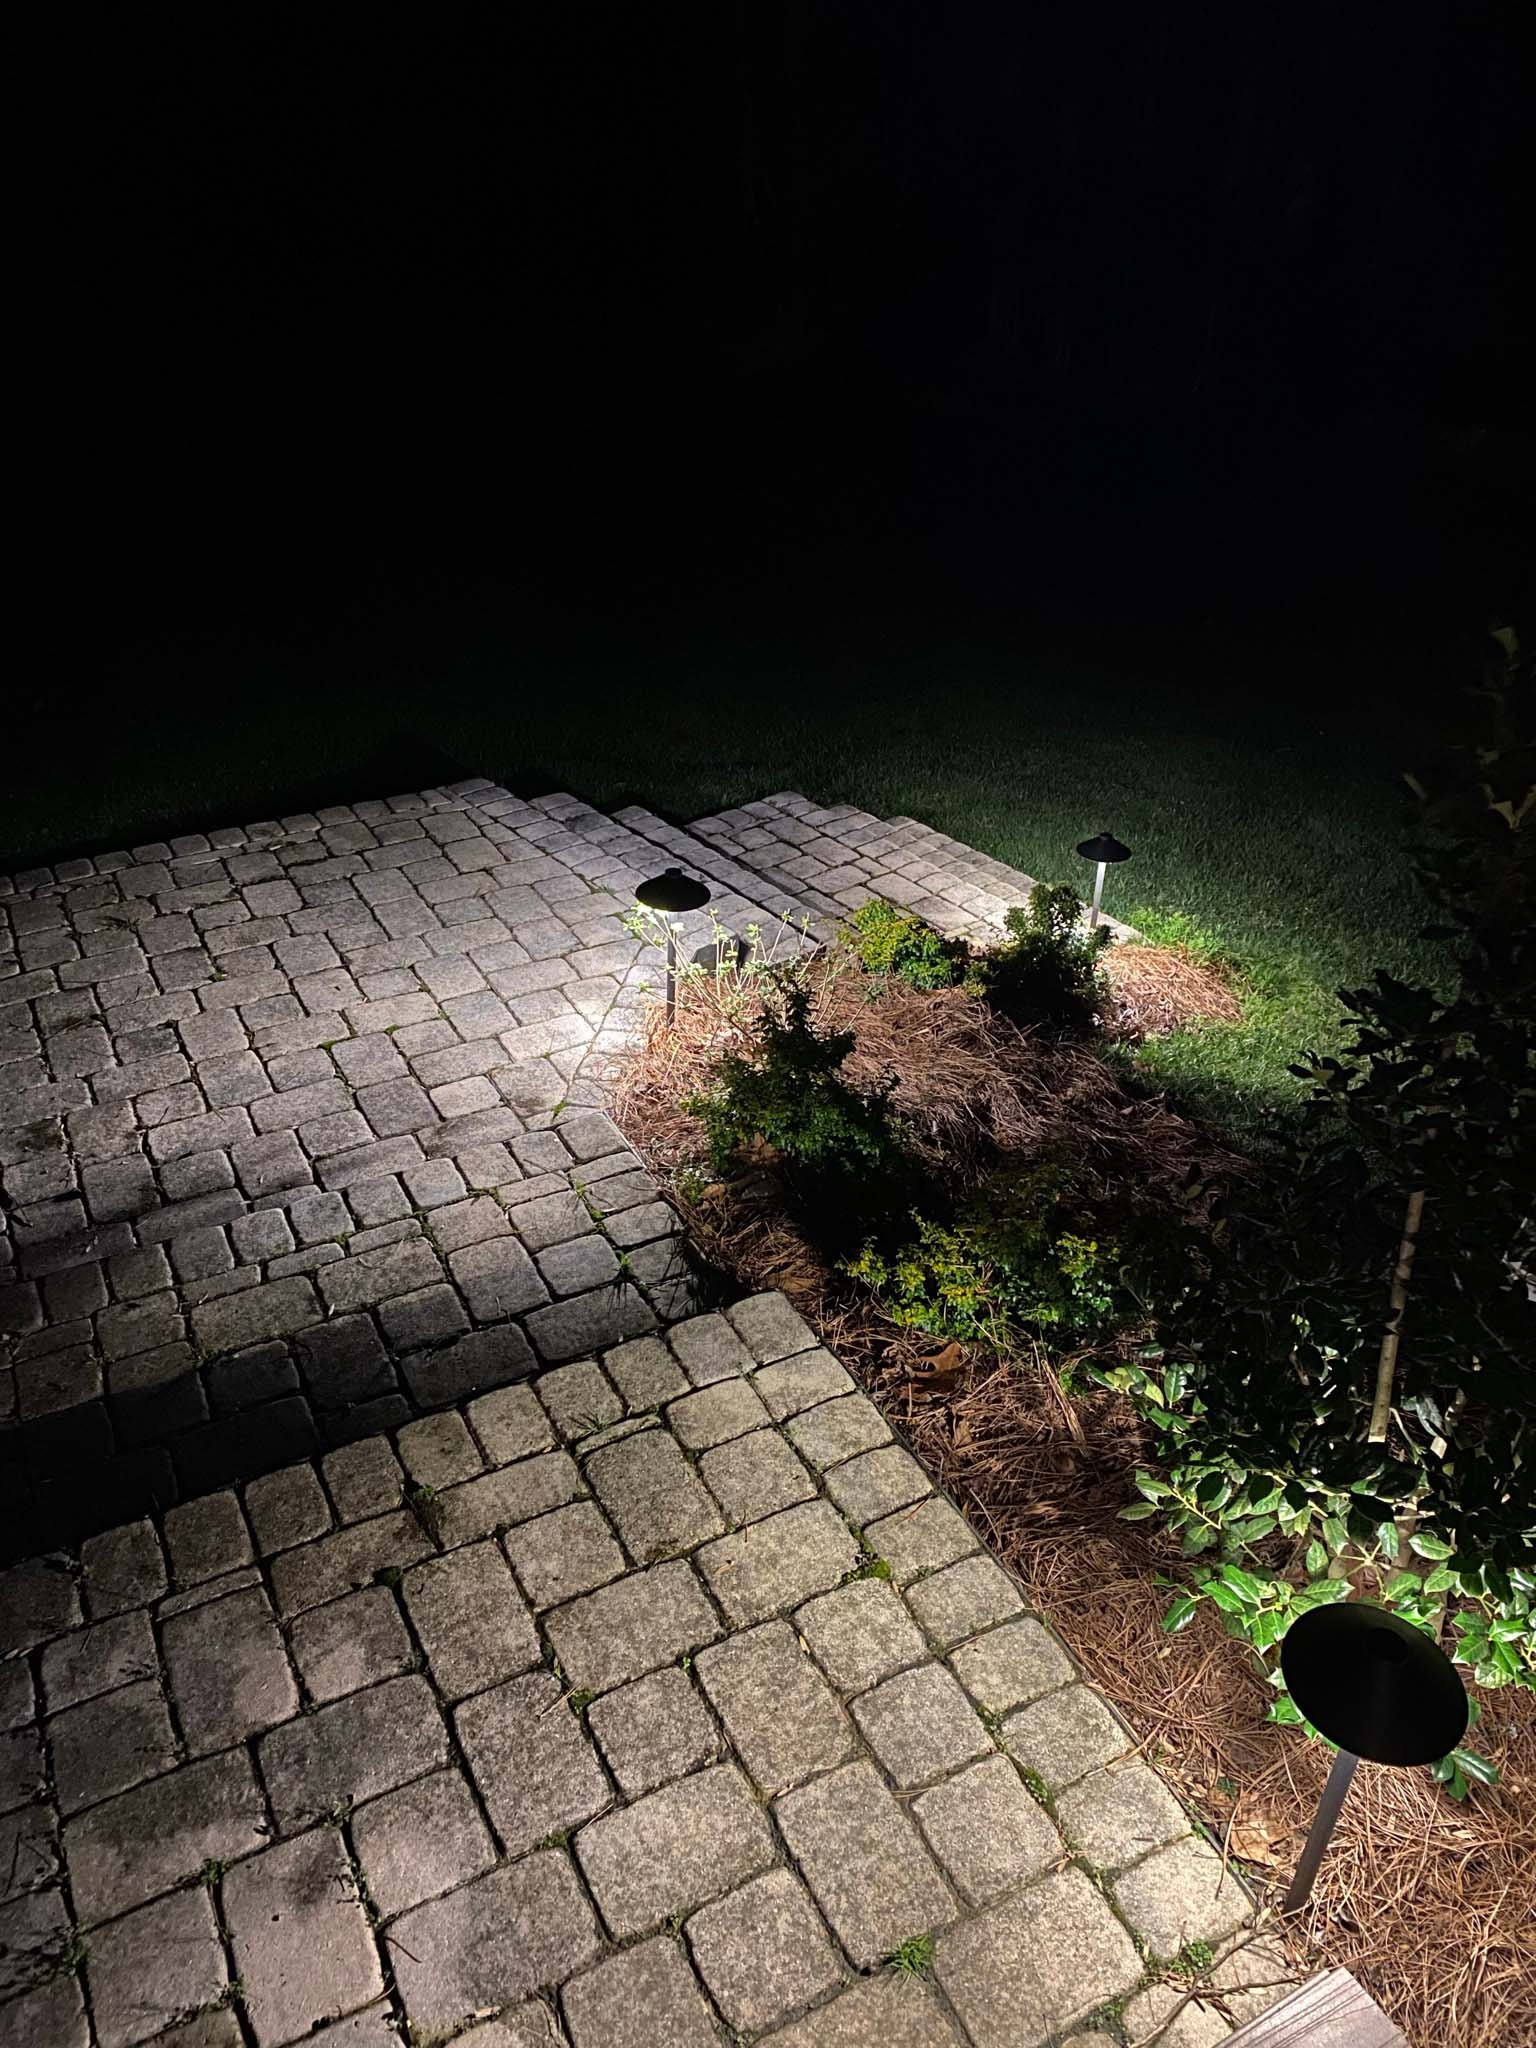  Paver stairs illuminated with traditional path lights.  